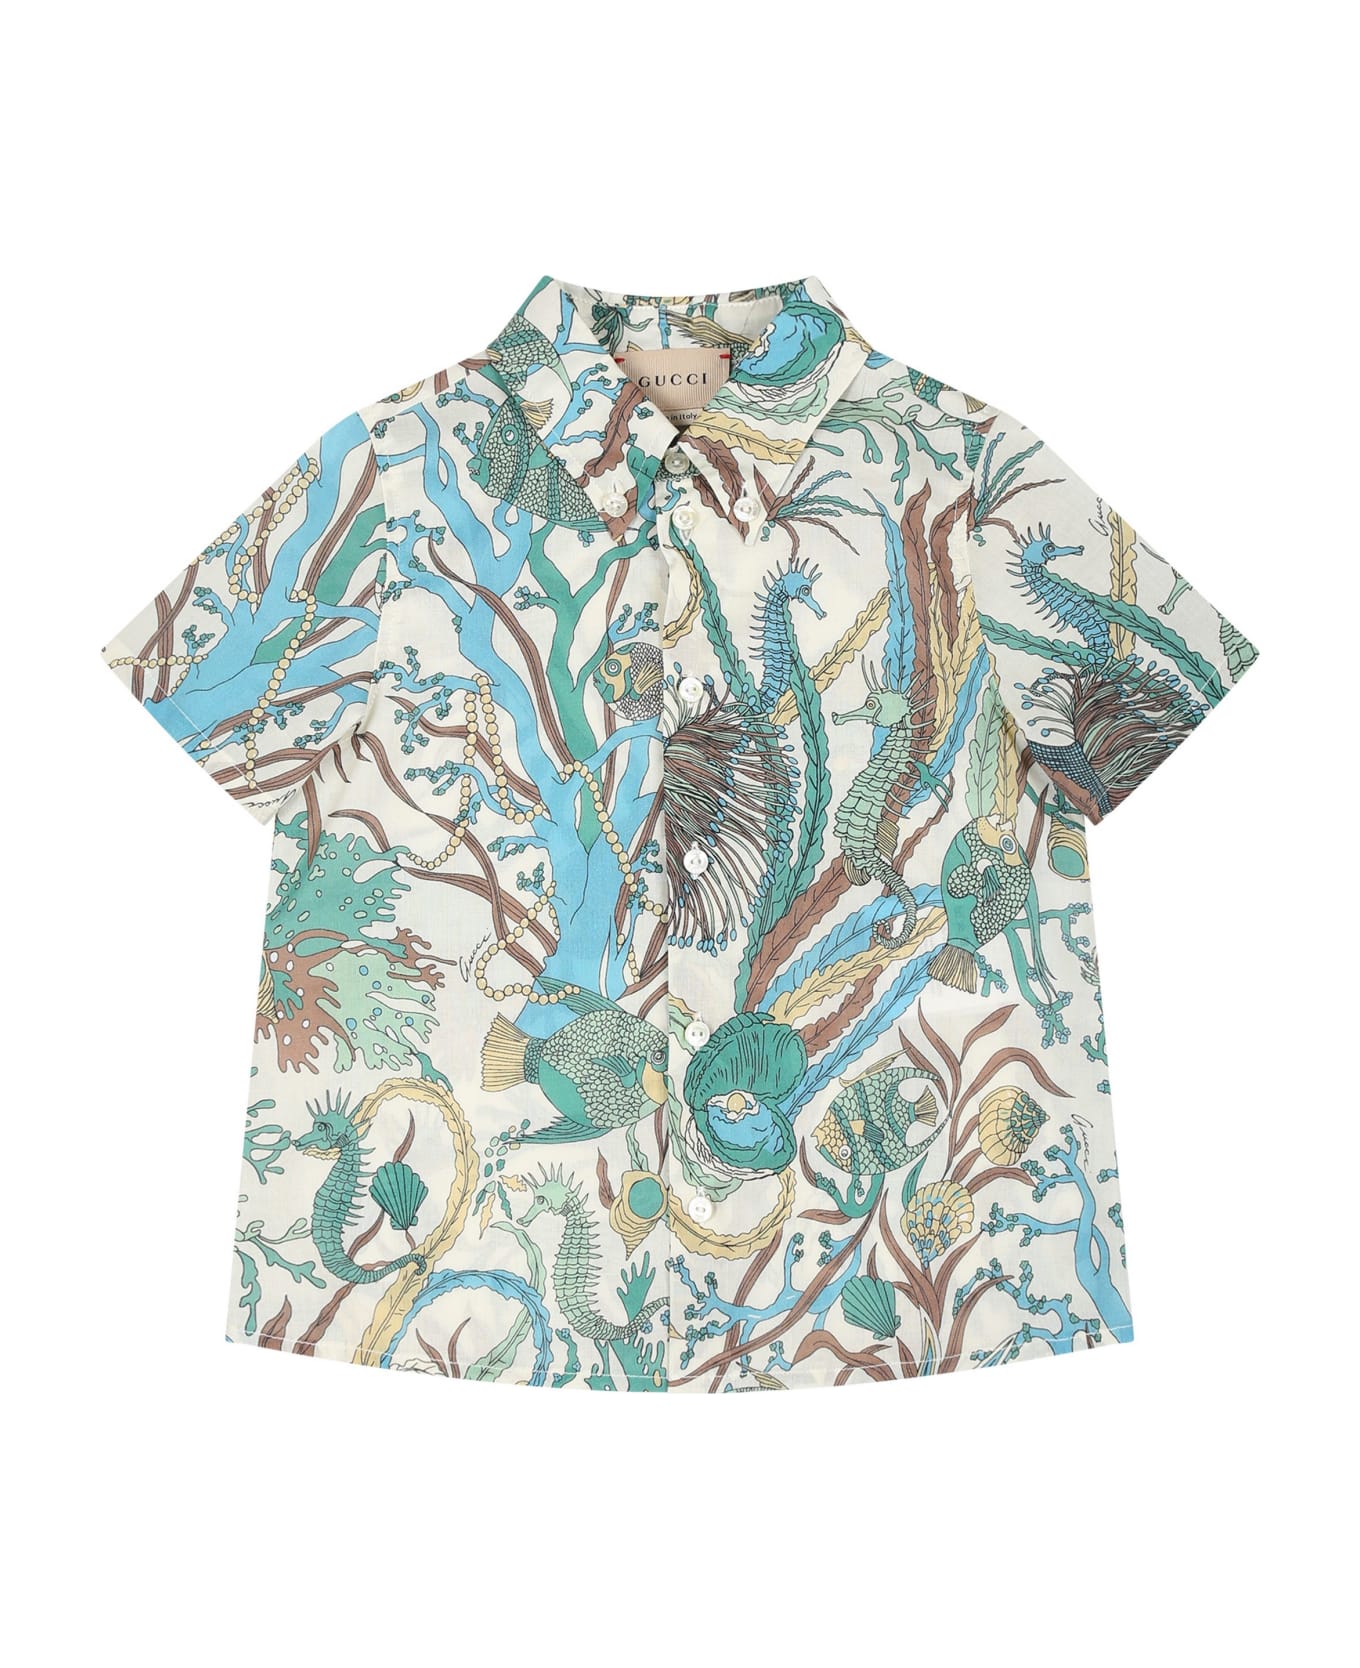 Gucci Ivory Shirt For Baby Boy With Marine Print - Multicolor